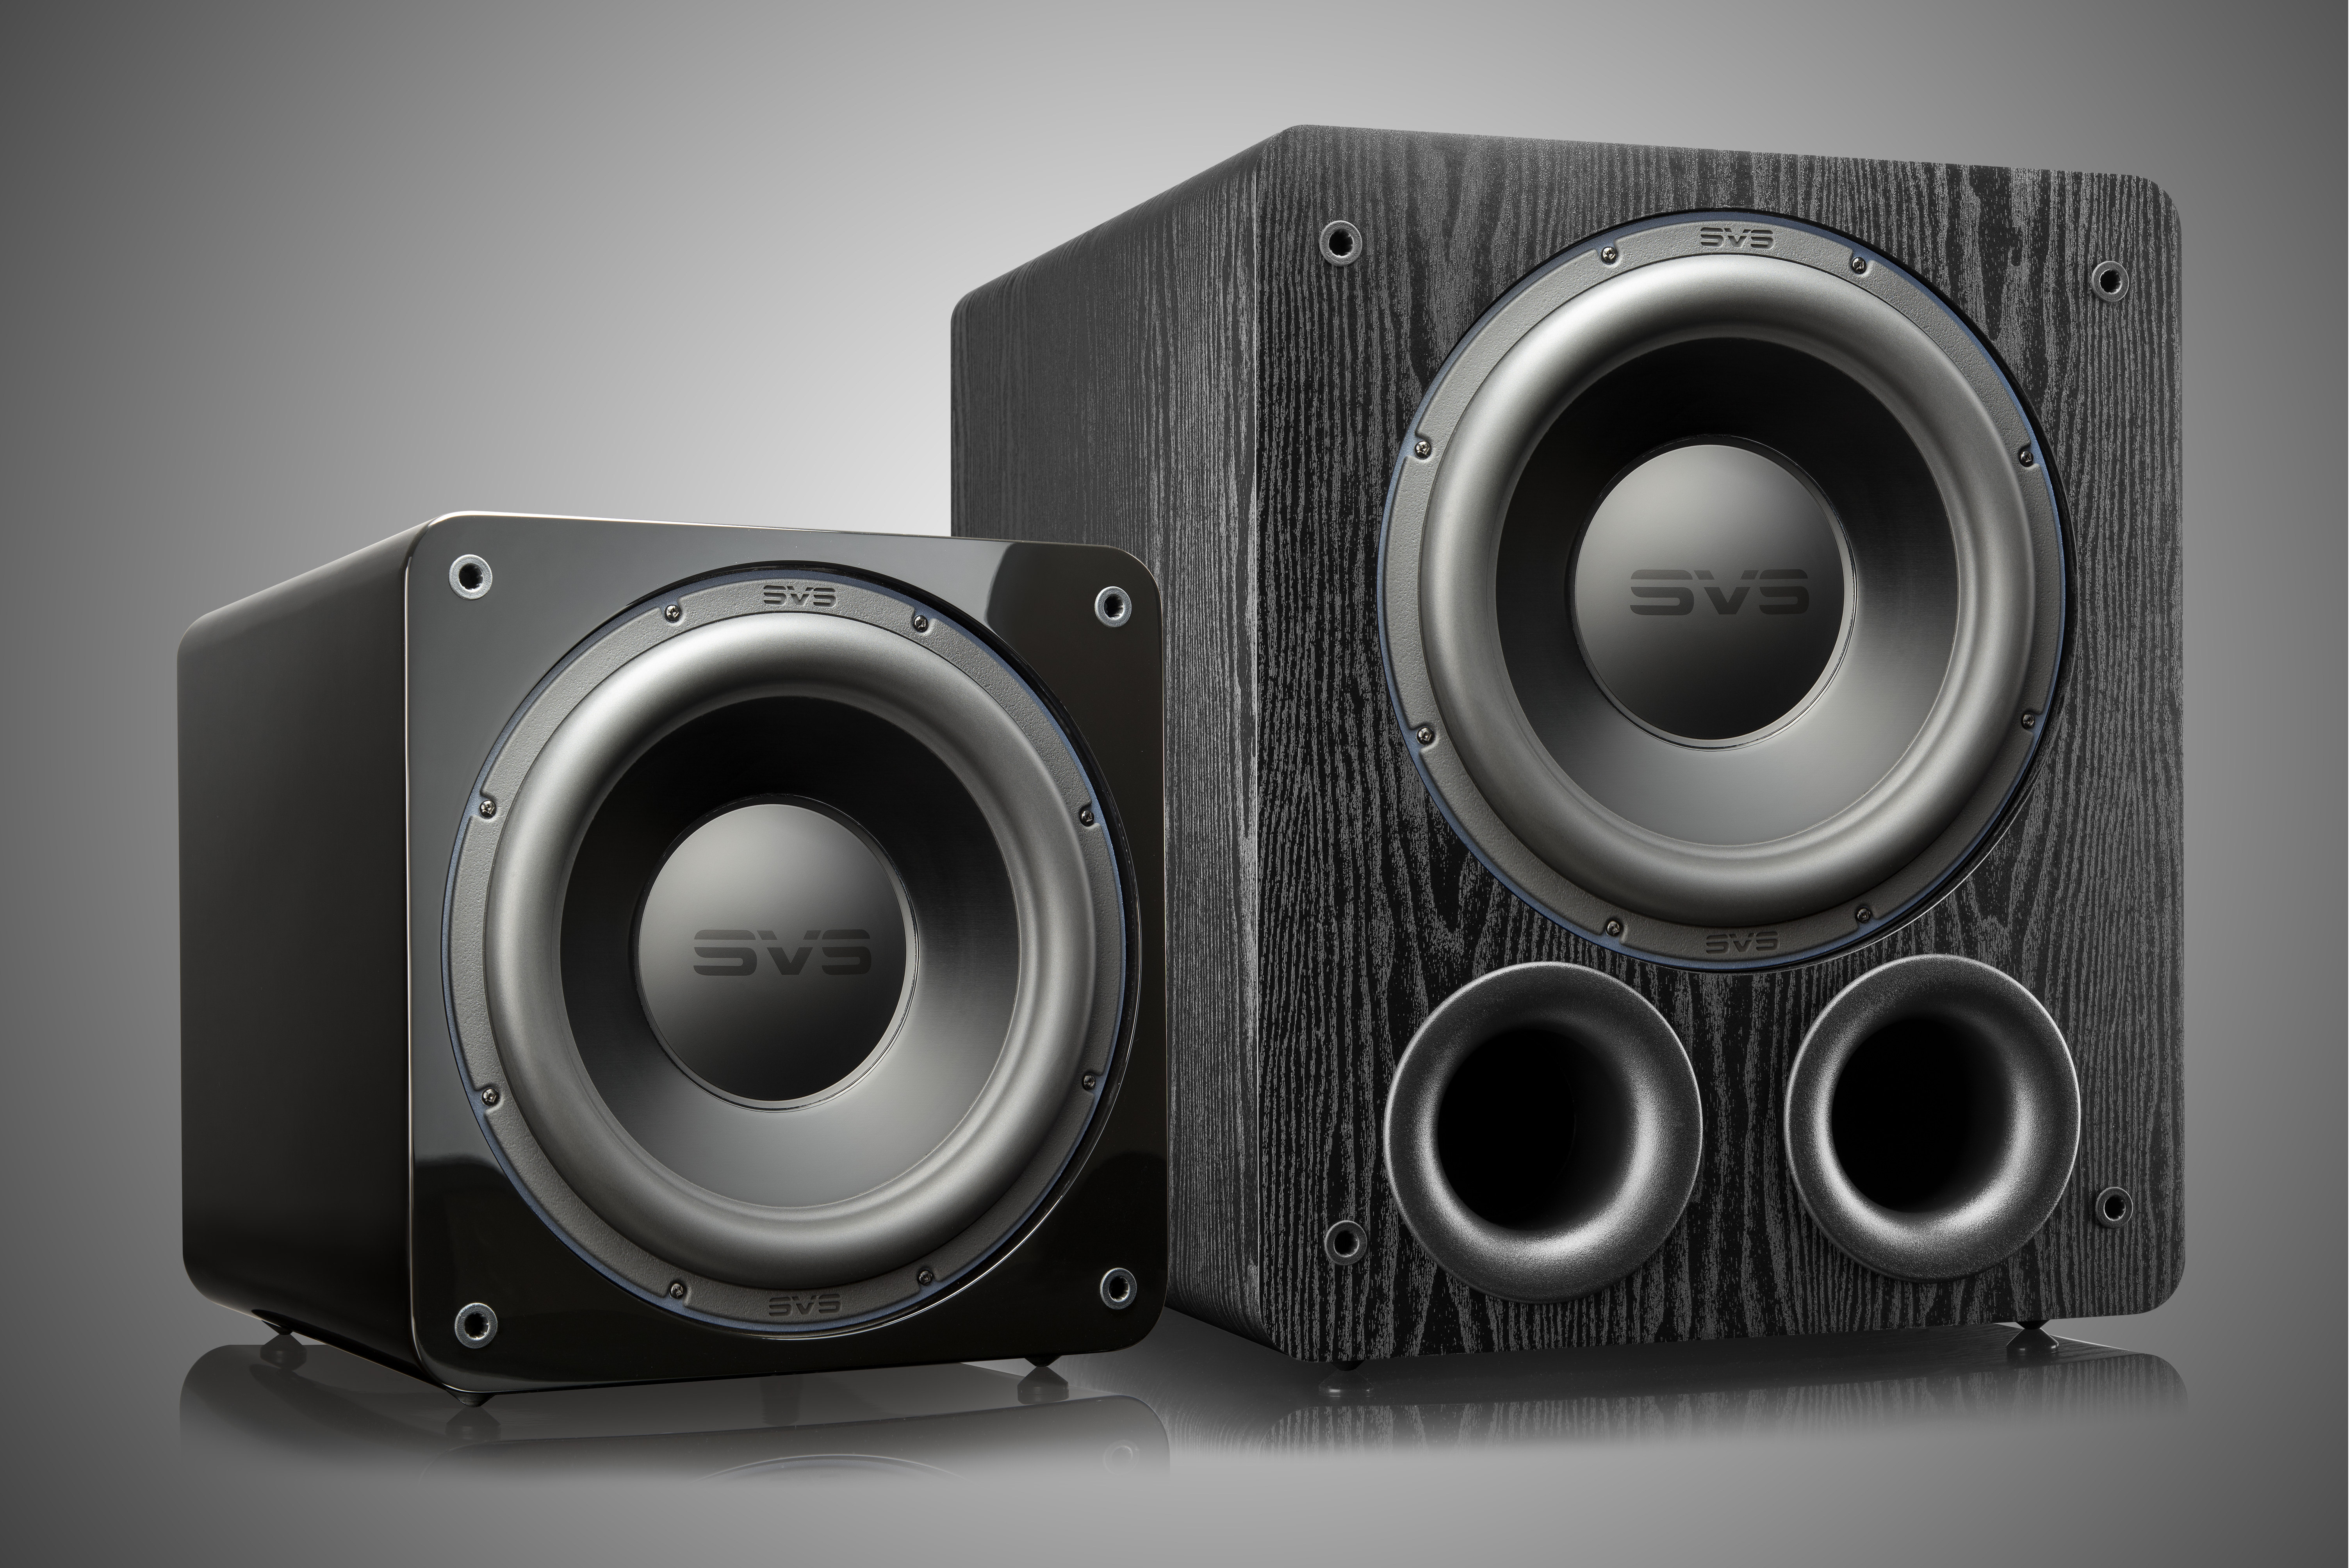 Svs Launches 3000 Series Subwoofers